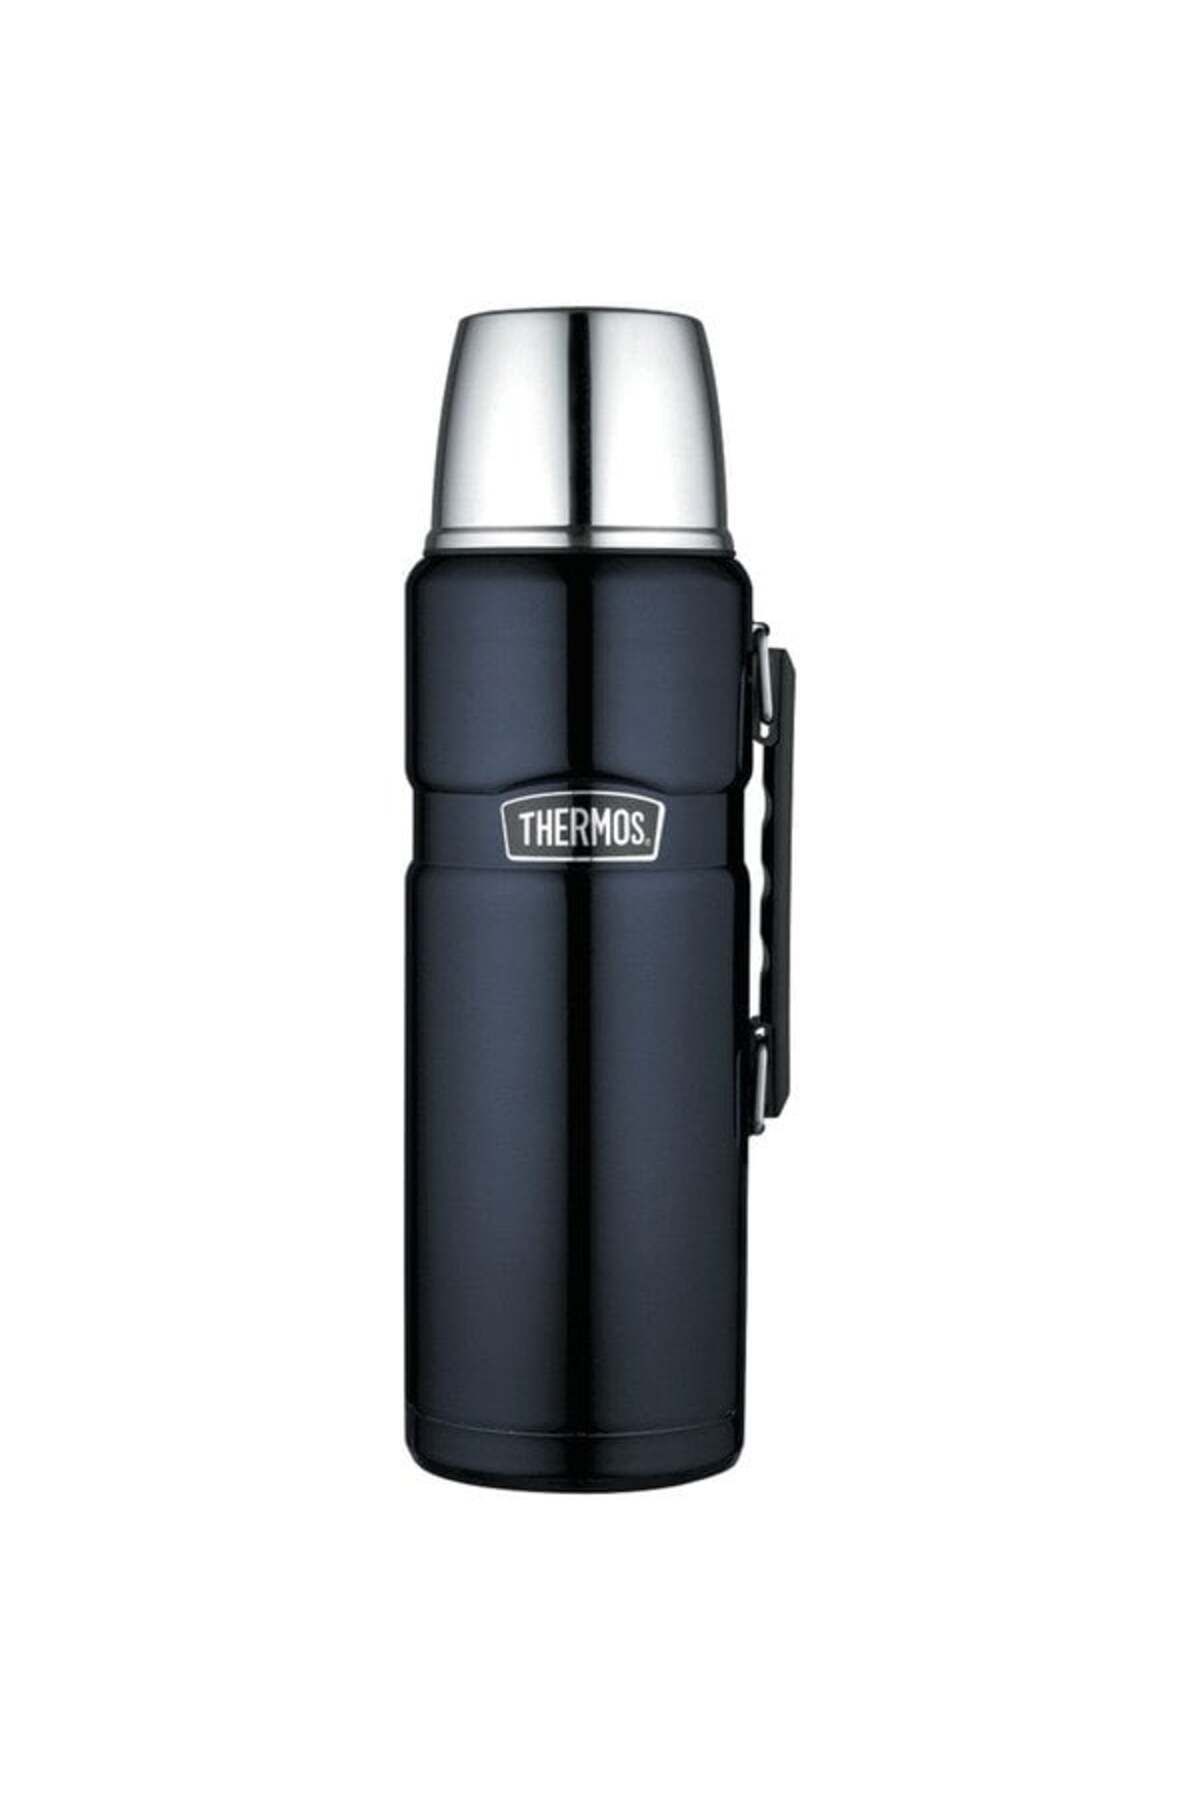 Thermos Sk 2020 Stainless King X Large Termos 2 Lt